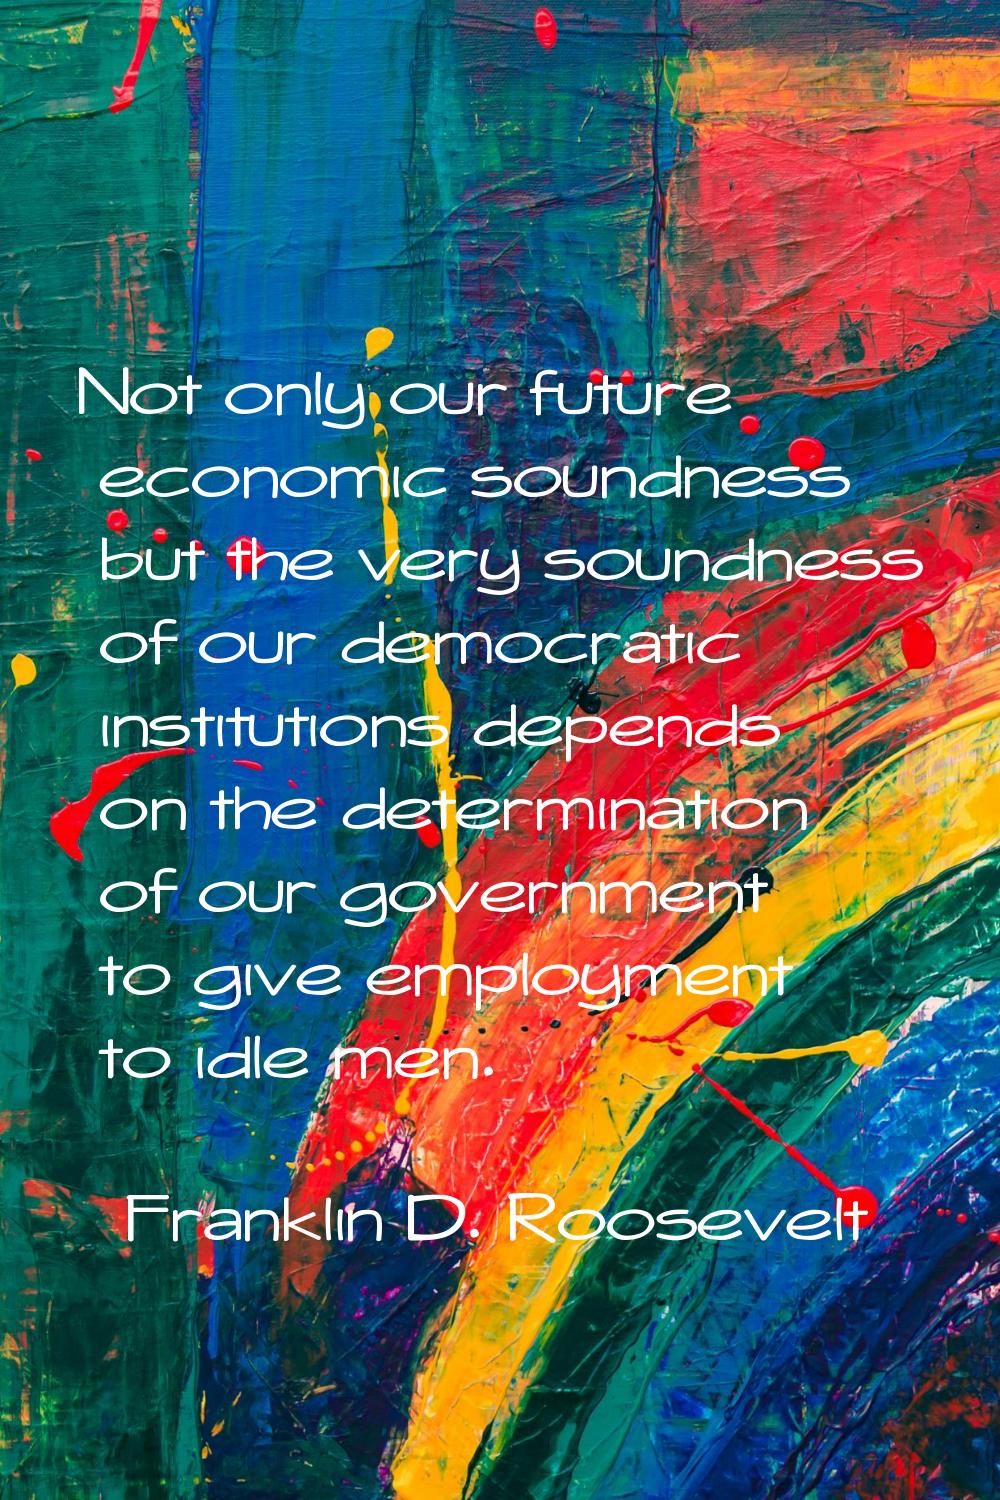 Not only our future economic soundness but the very soundness of our democratic institutions depend